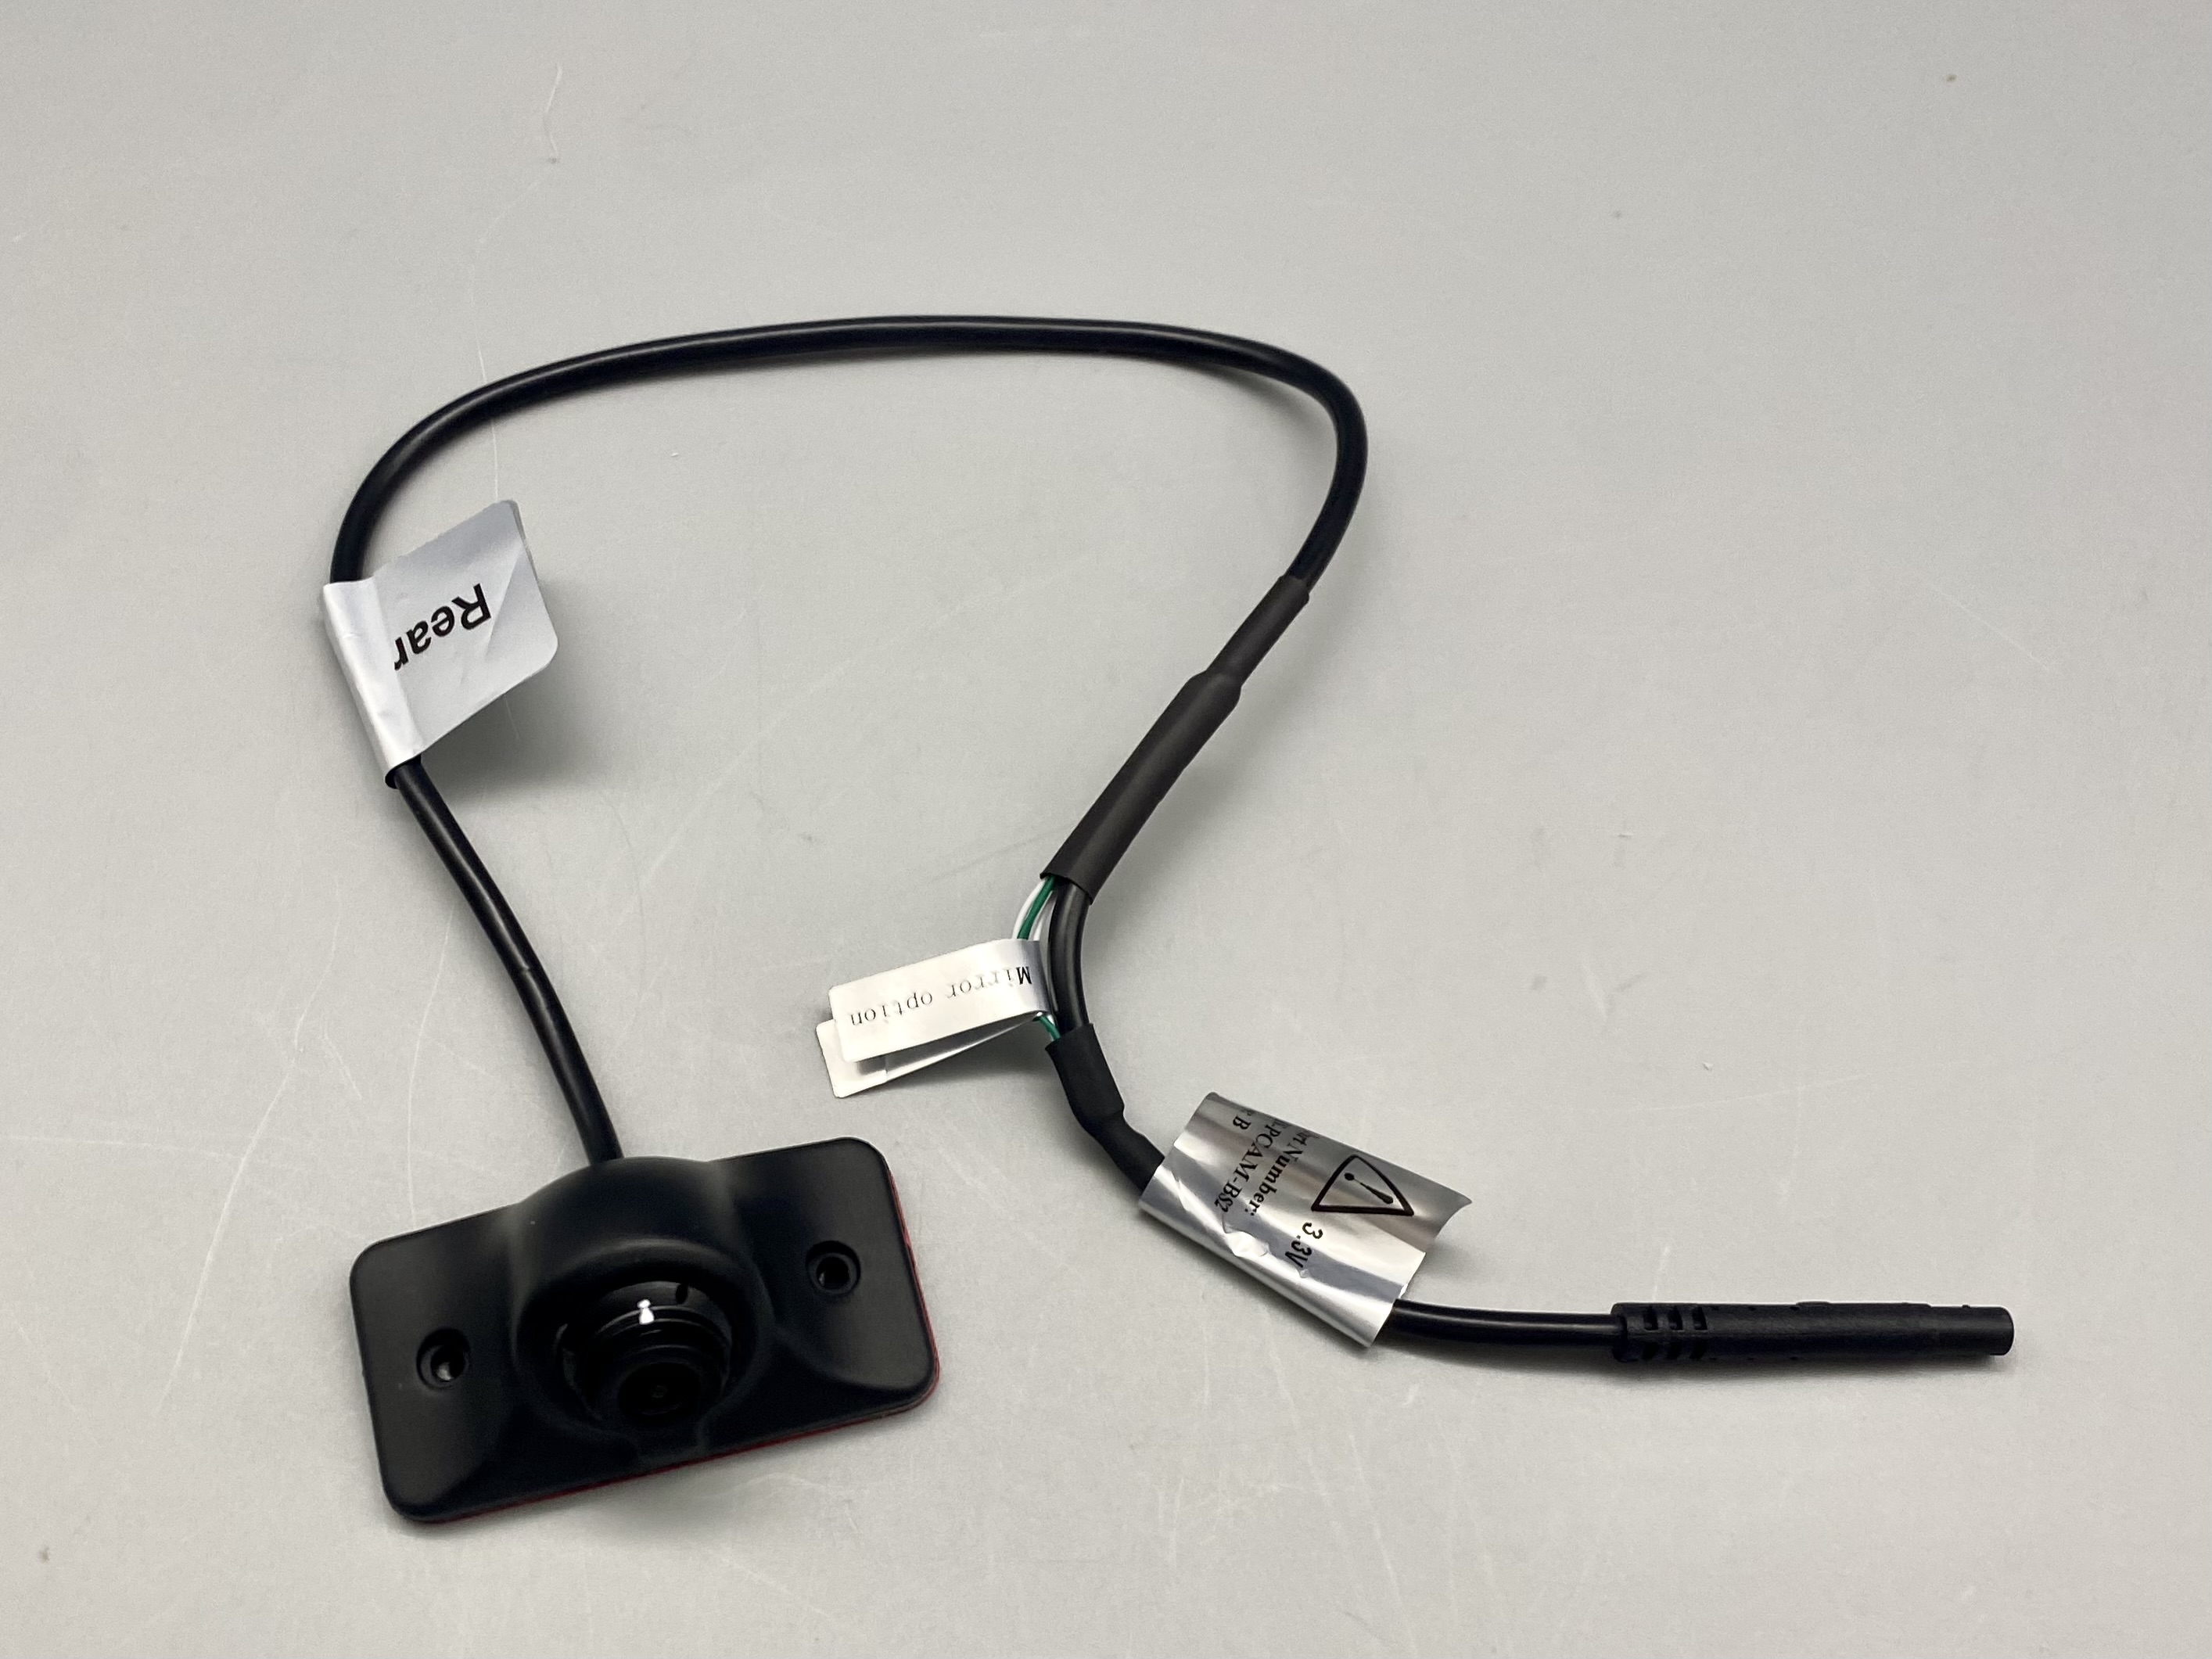 RV-PCAM-BS2 Rear Camera with micro connector